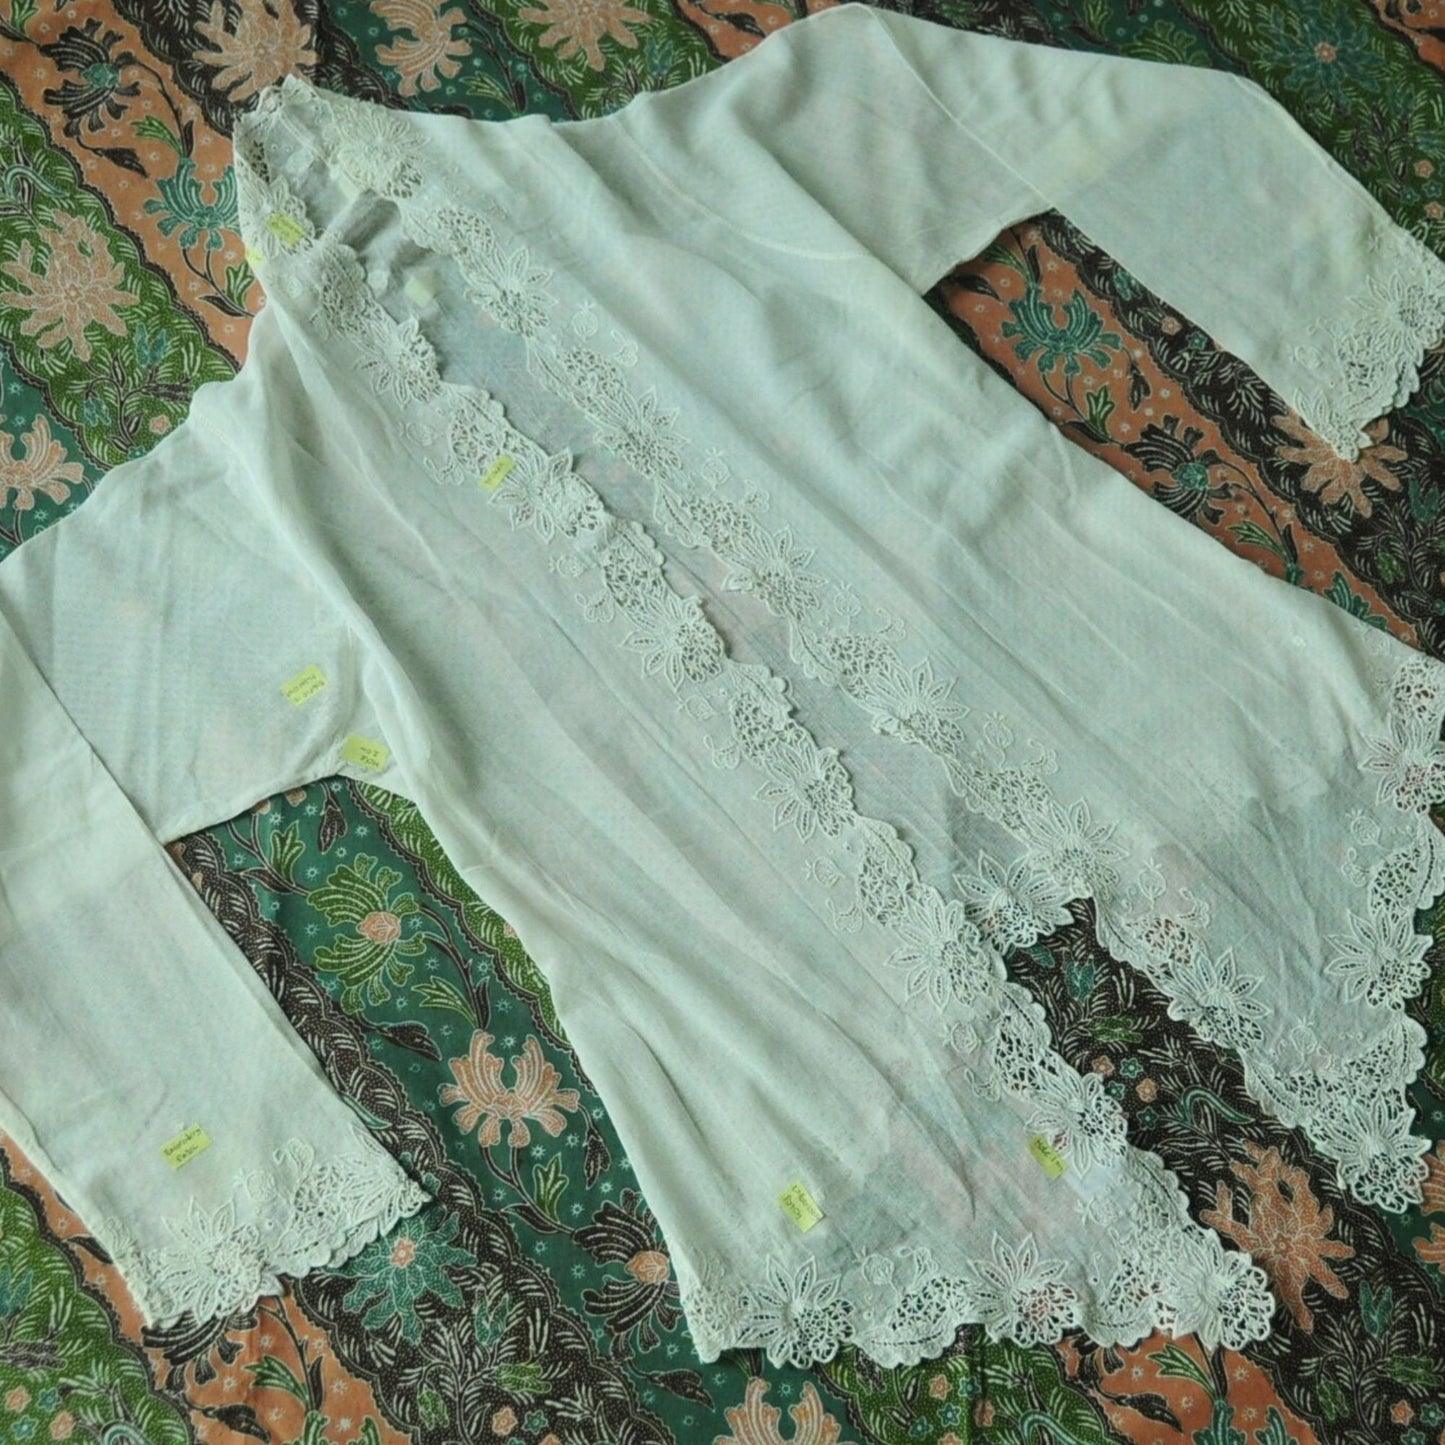 Vintage Broken White Indonesian Kebaya with White and Blue Floral Kerancang Embroidery